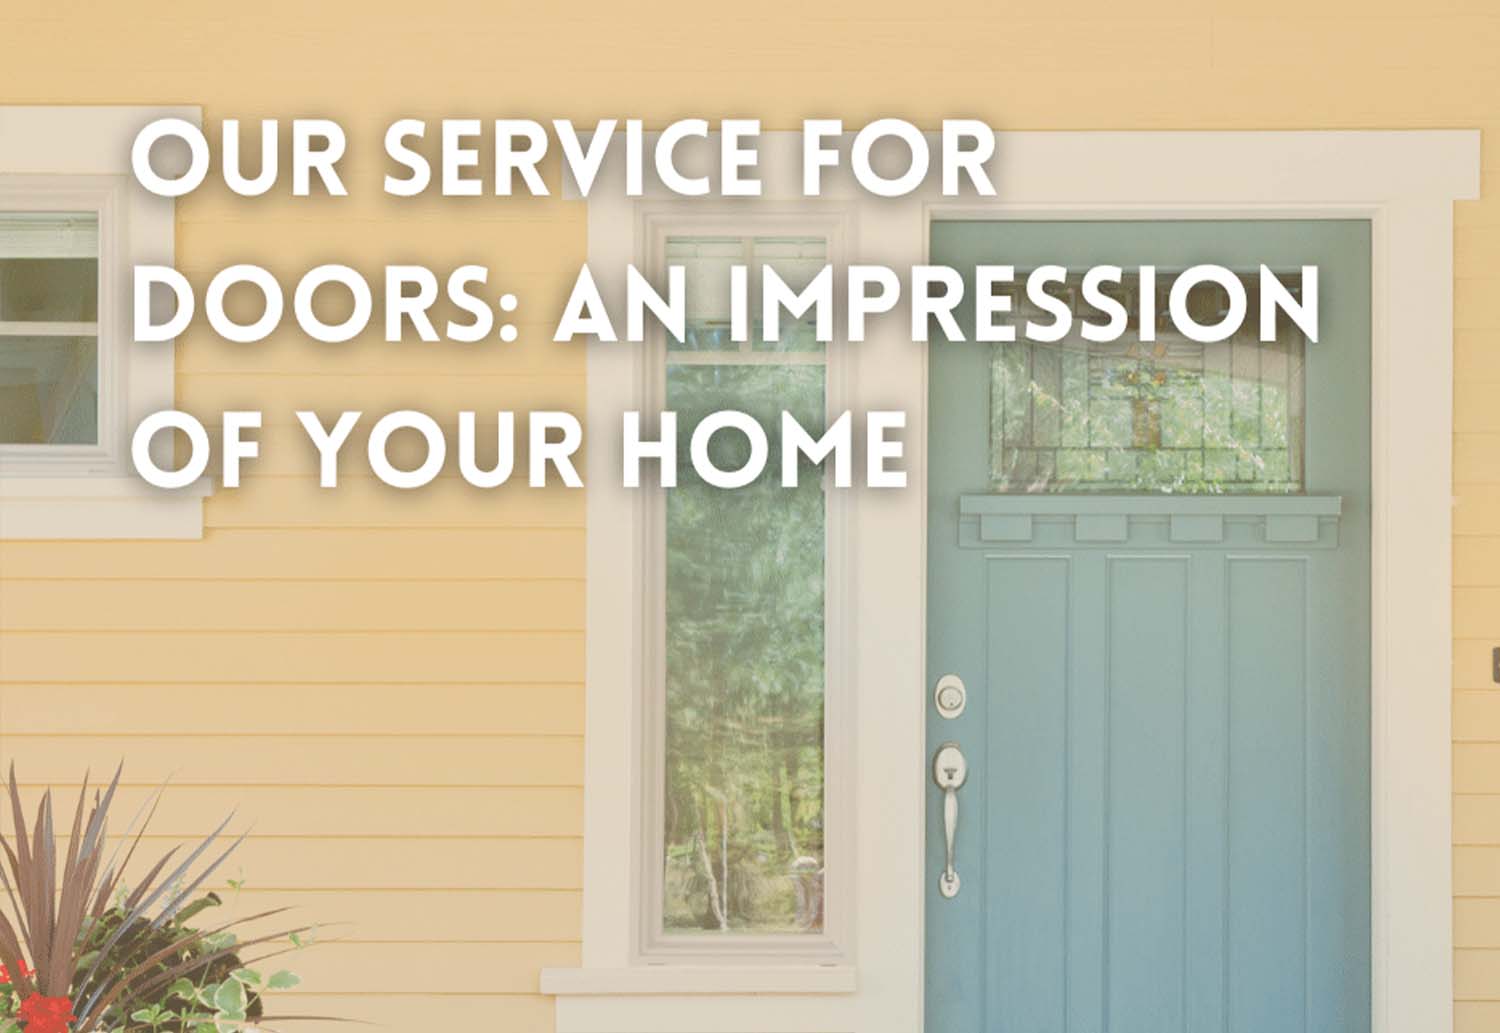 Our service for doors: an impression of your home